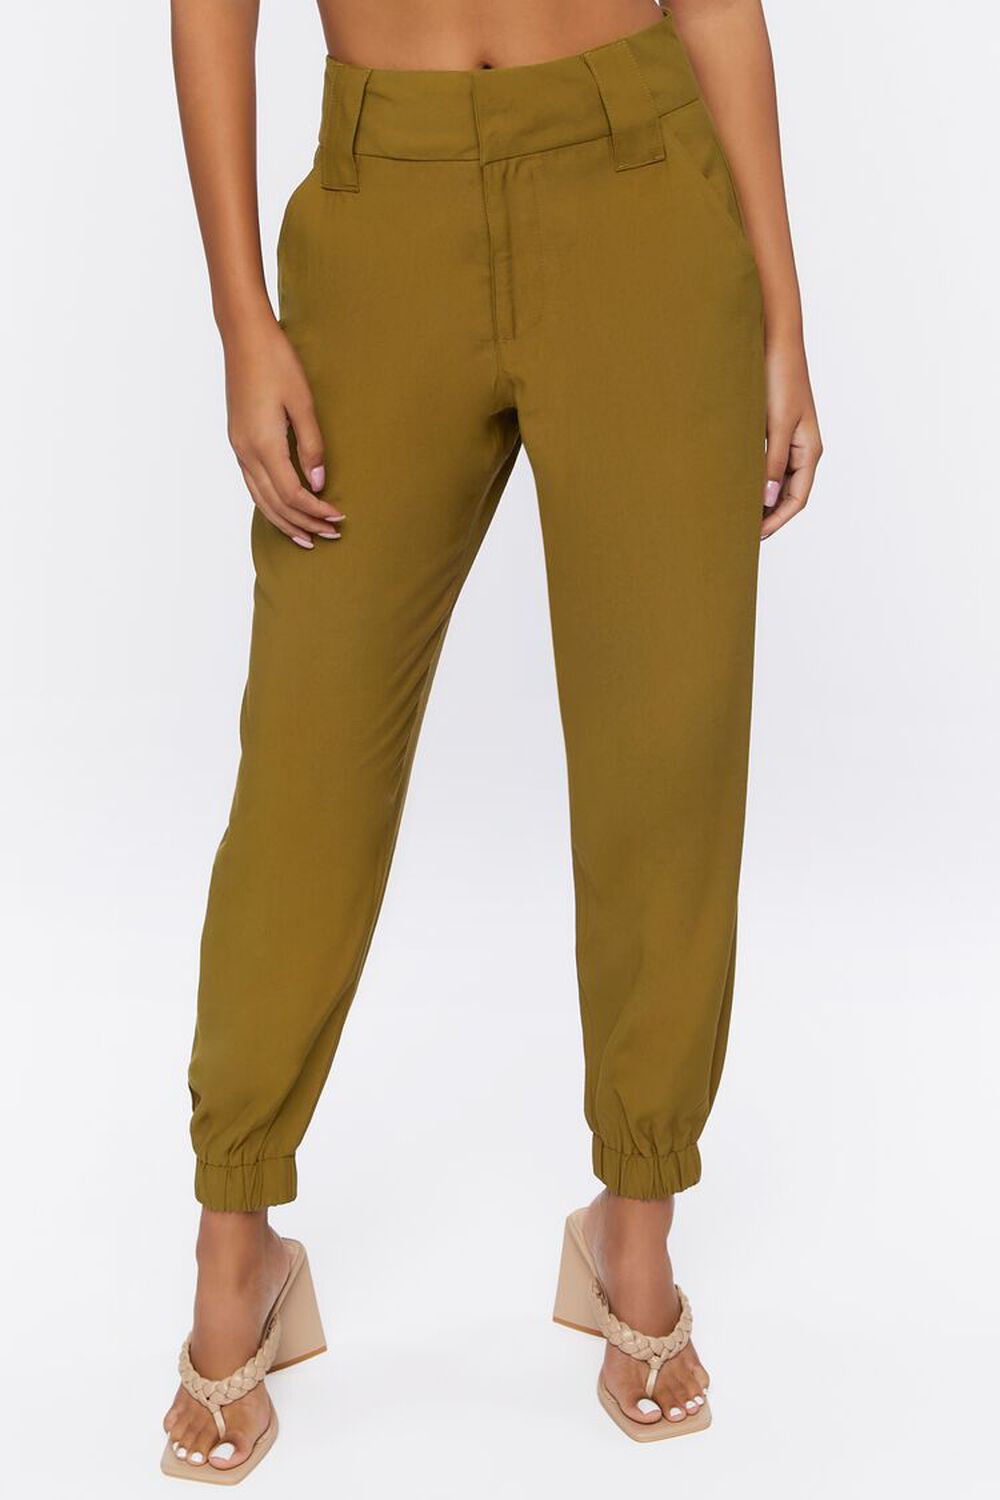 BEECH Mid-Rise Ankle Pants, image 2